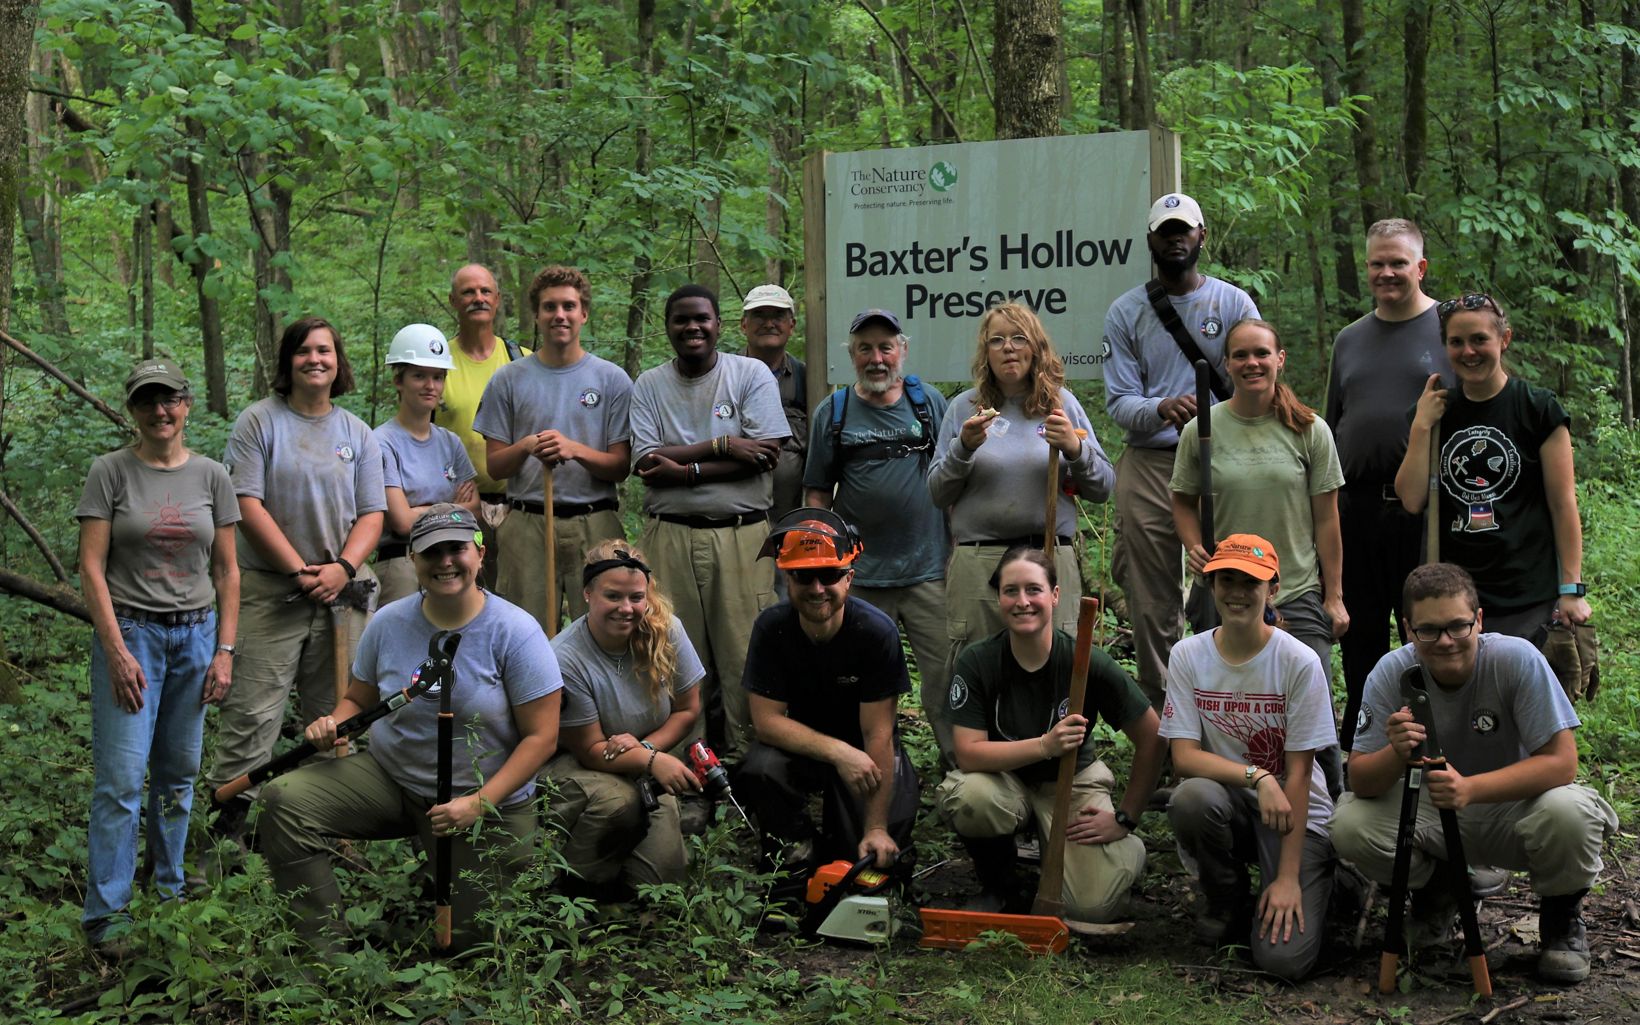 AmeriCorps NCCC crews work with volunteers and staff to improve hiking trails on preserves during the summer.